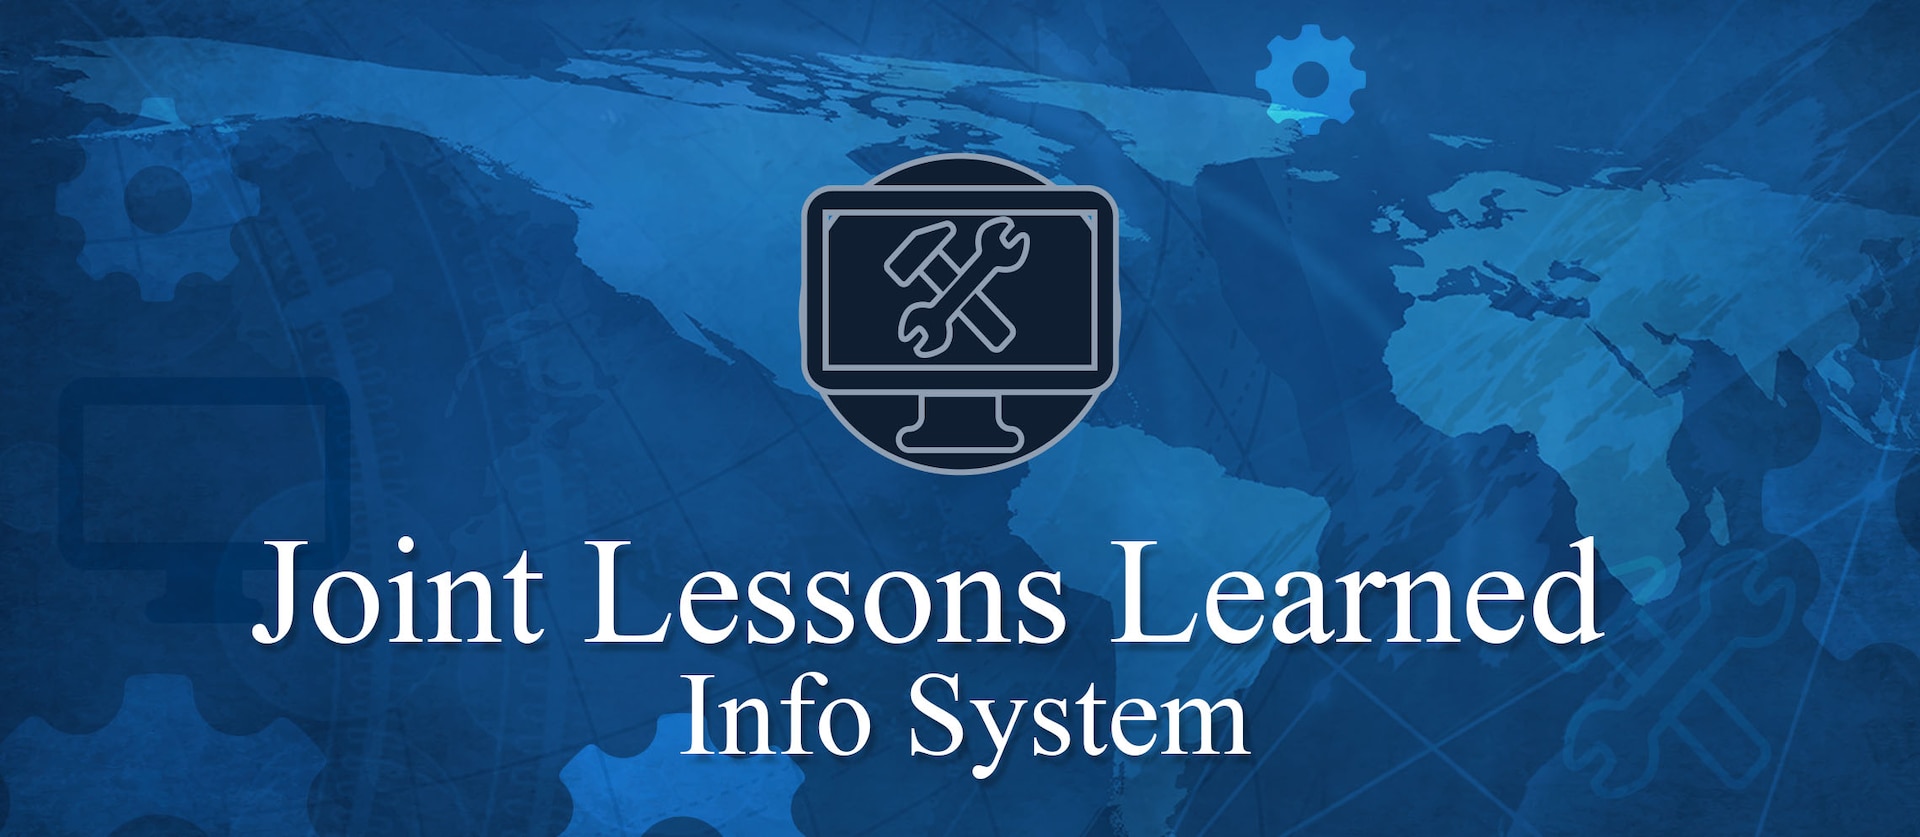 Text for Joint Lessons Learned Info System accompanied by an icon with a monitor with crossed hammer and wrench on the screen, on an abstract blue map background